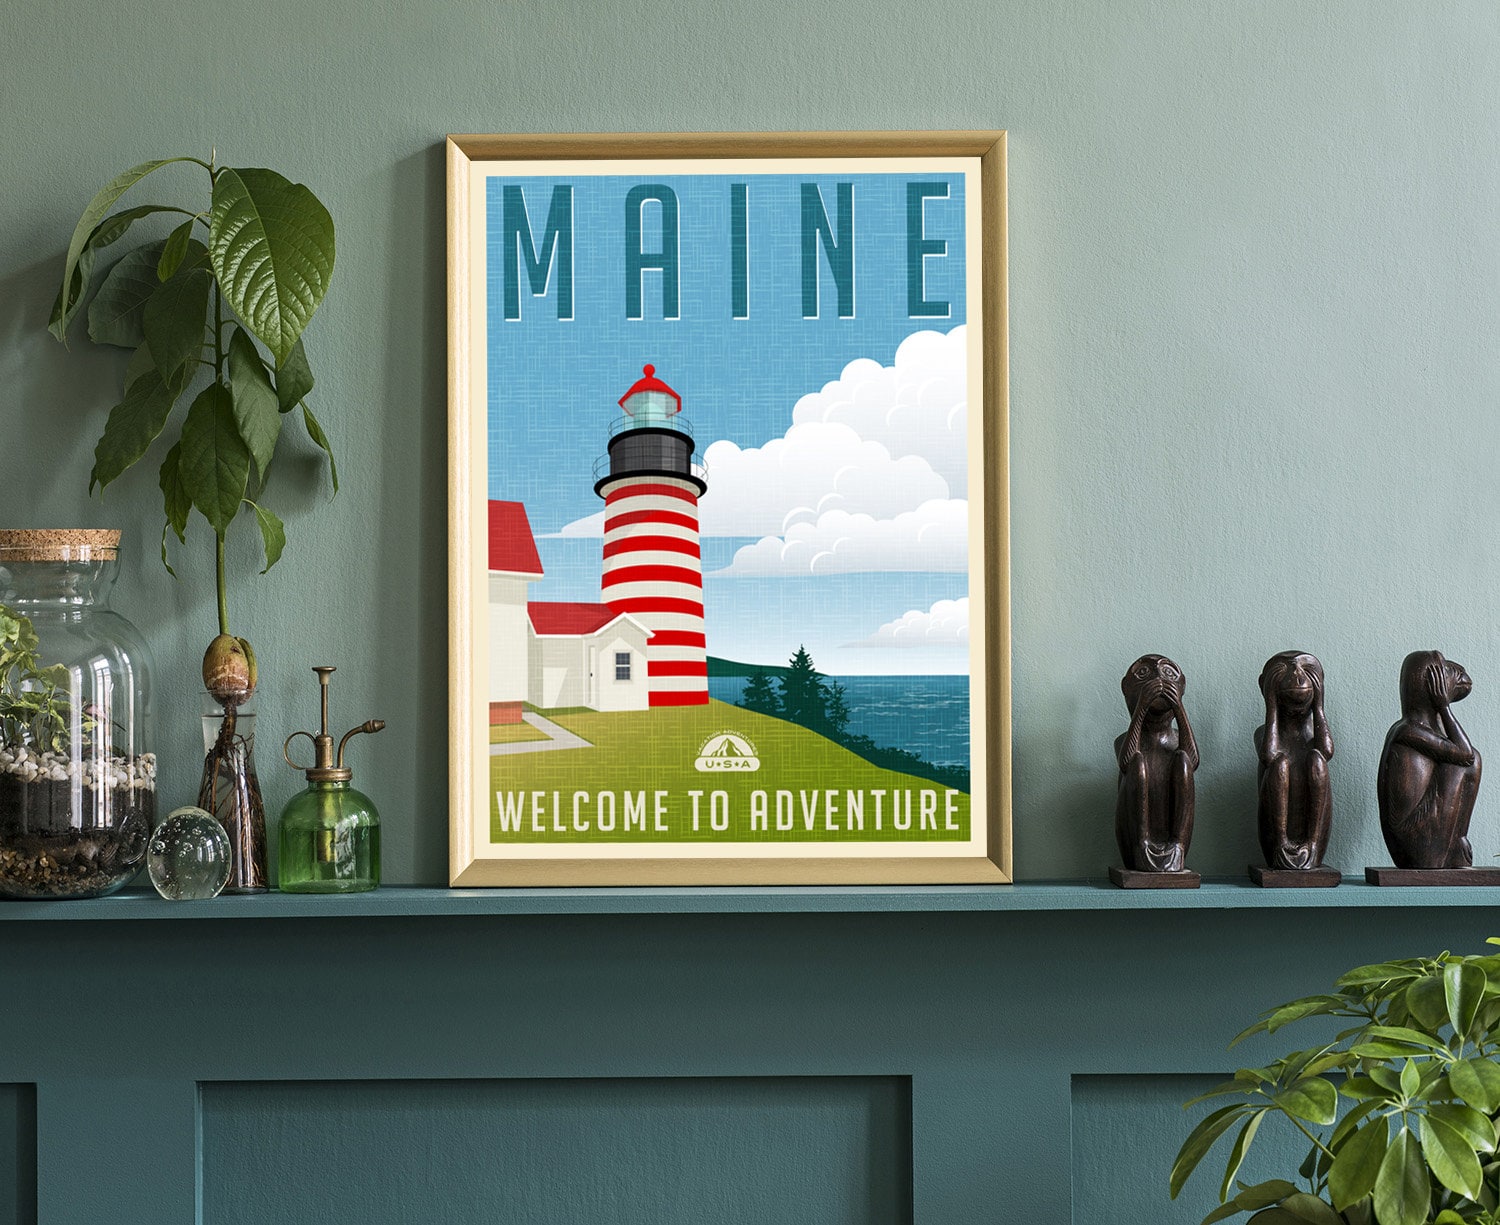 Maine Vintage Rustic Poster Print, Retro Style Travel Poster